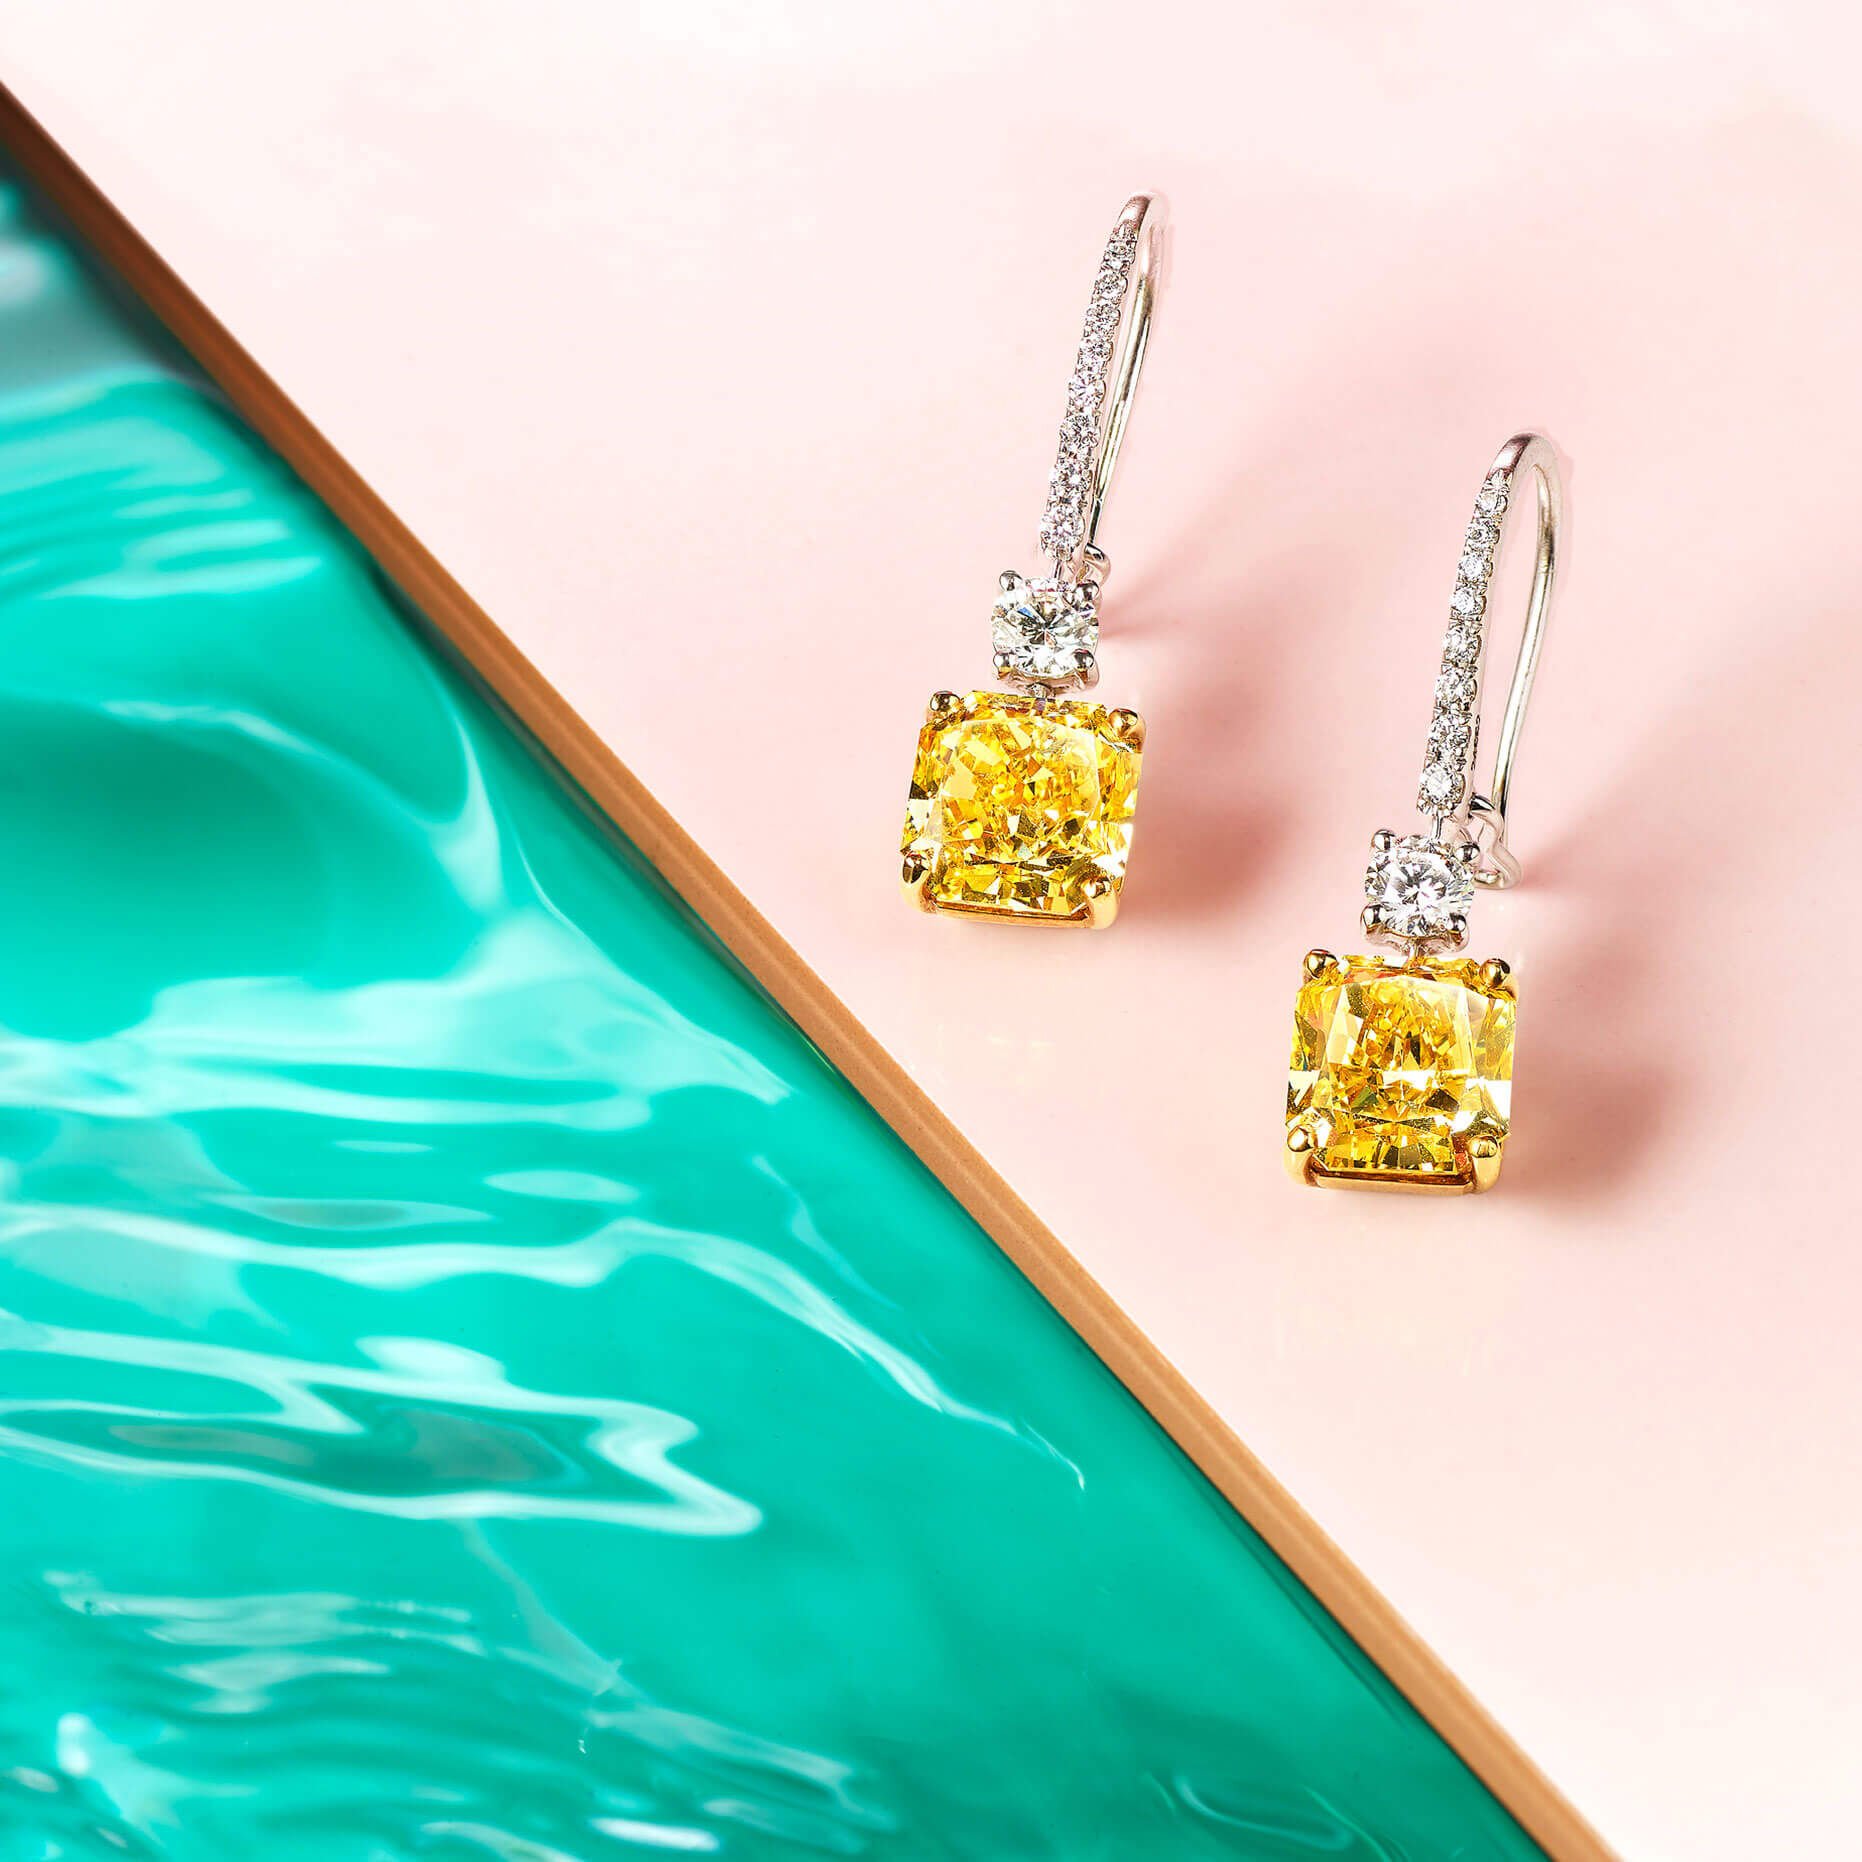 Graff Classic Graff collection Yellow and white diamond earrings at a pool side